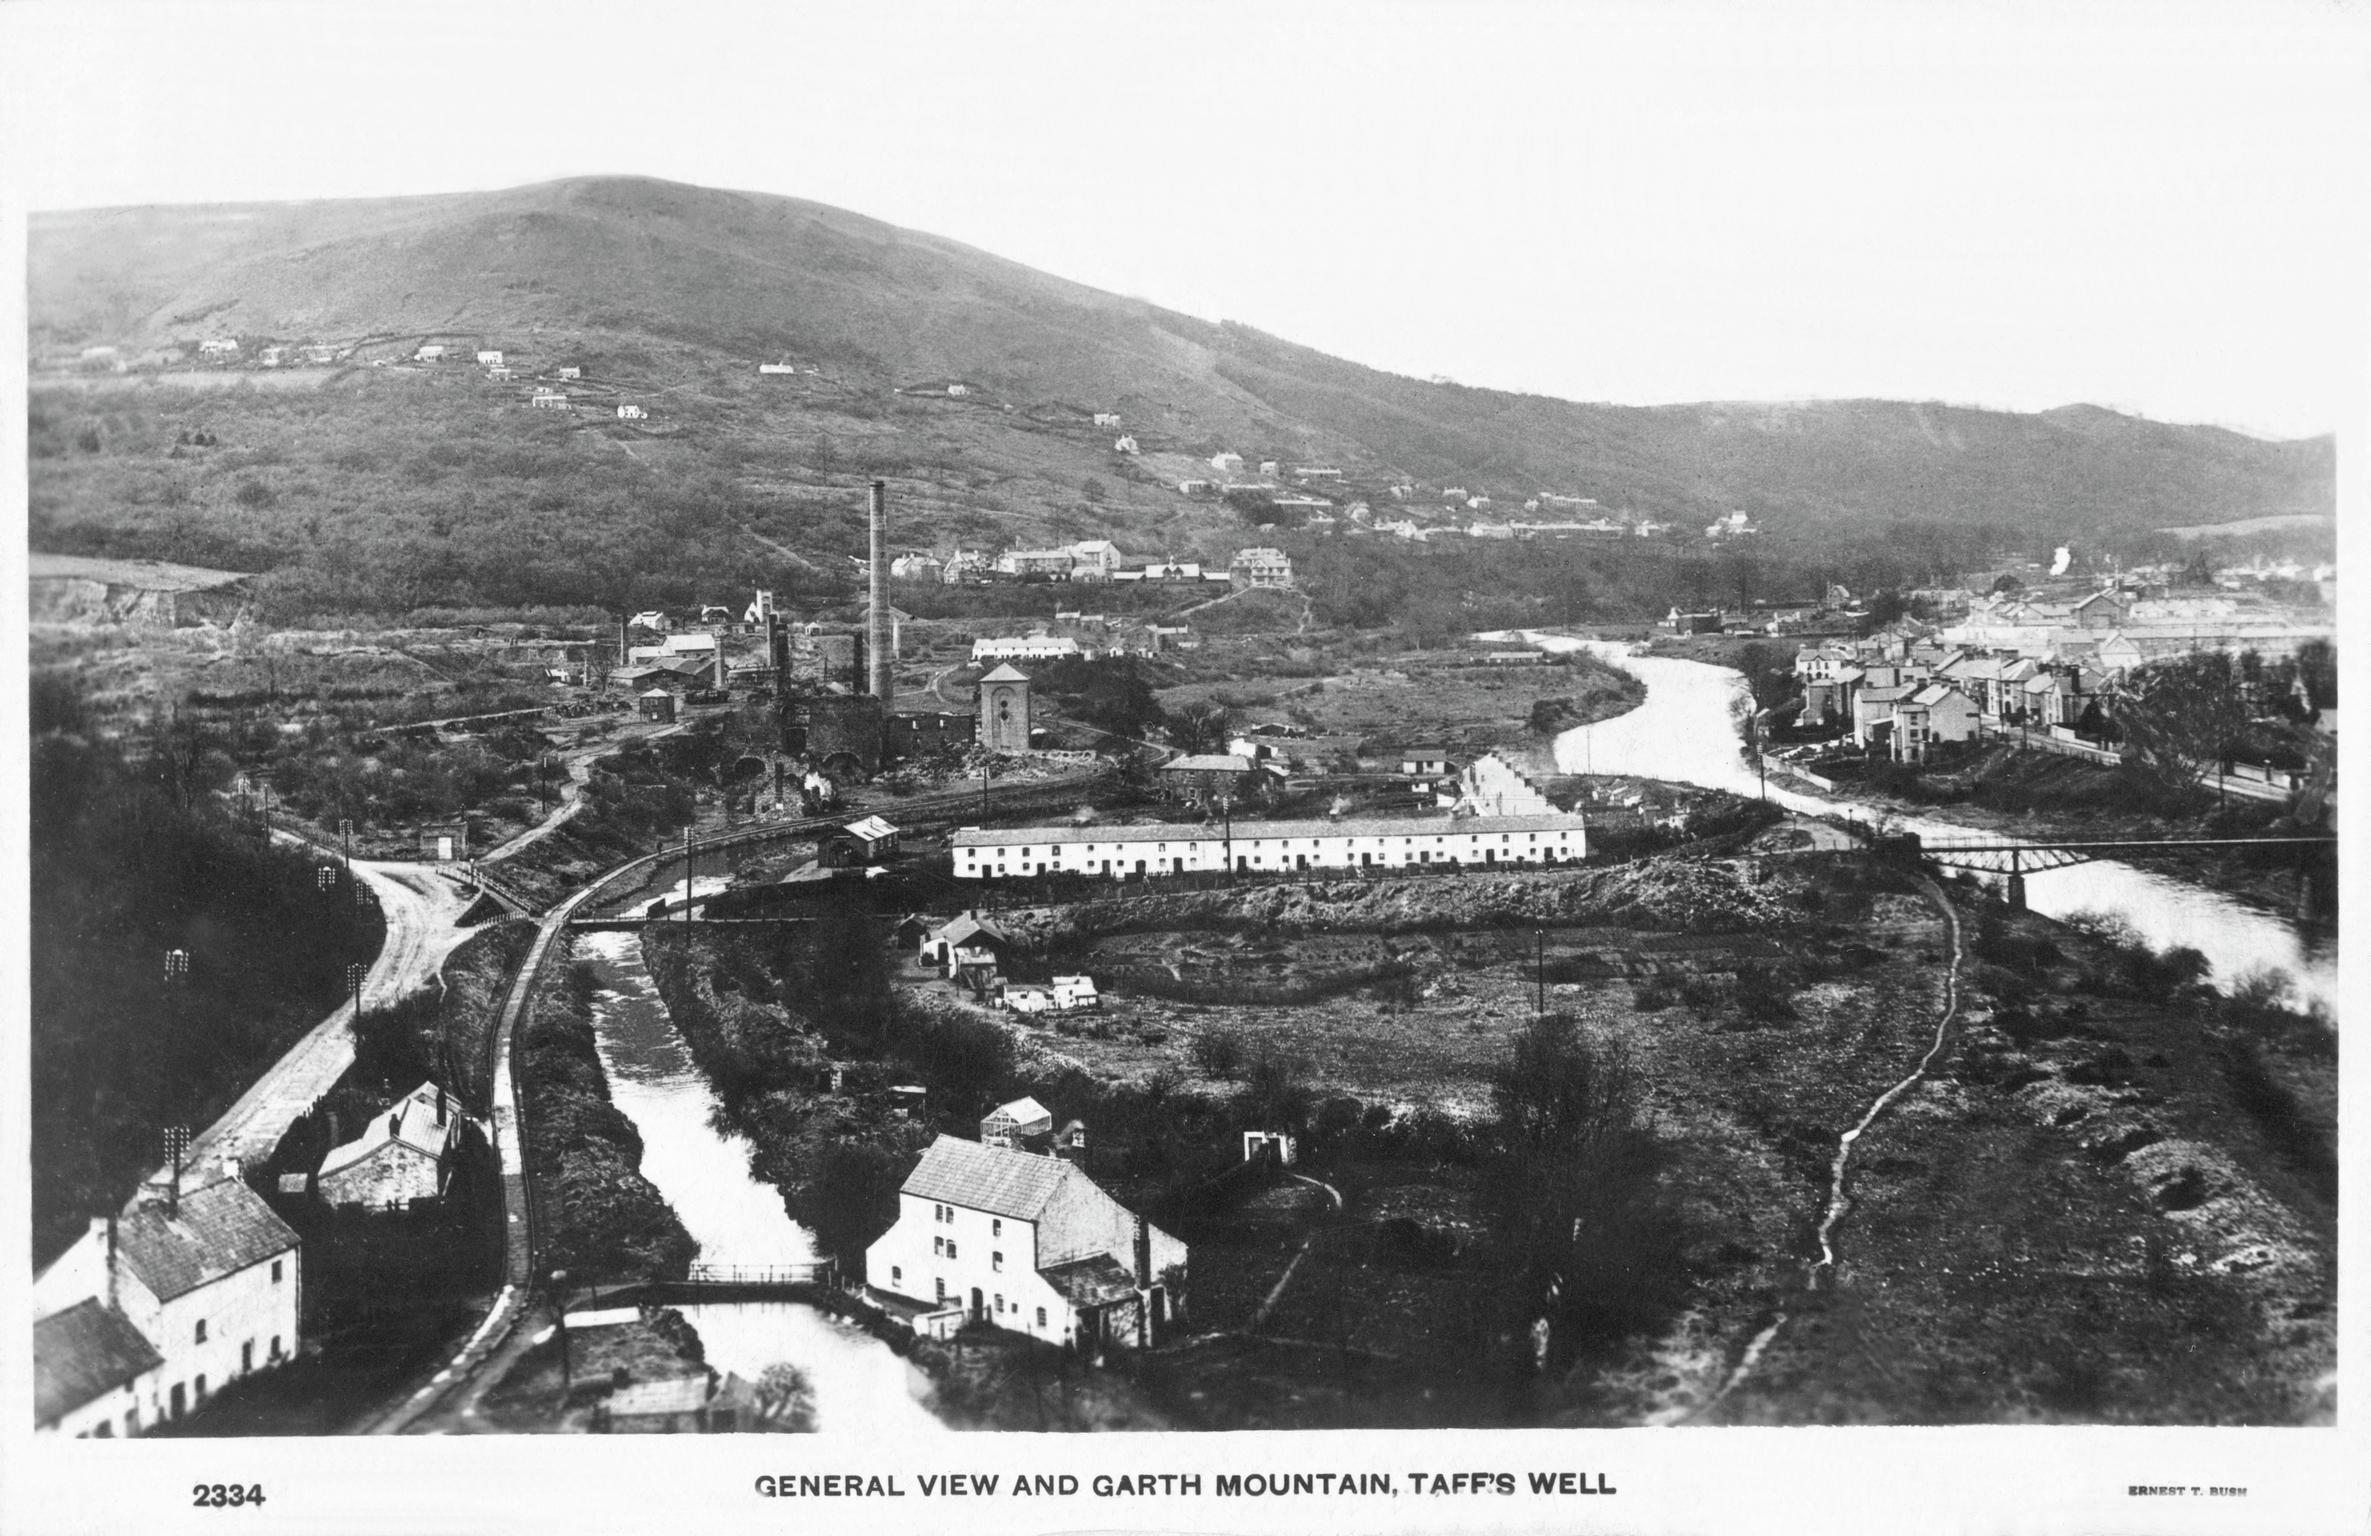 General View and Garth Mountain, Taff's Well (postcard)